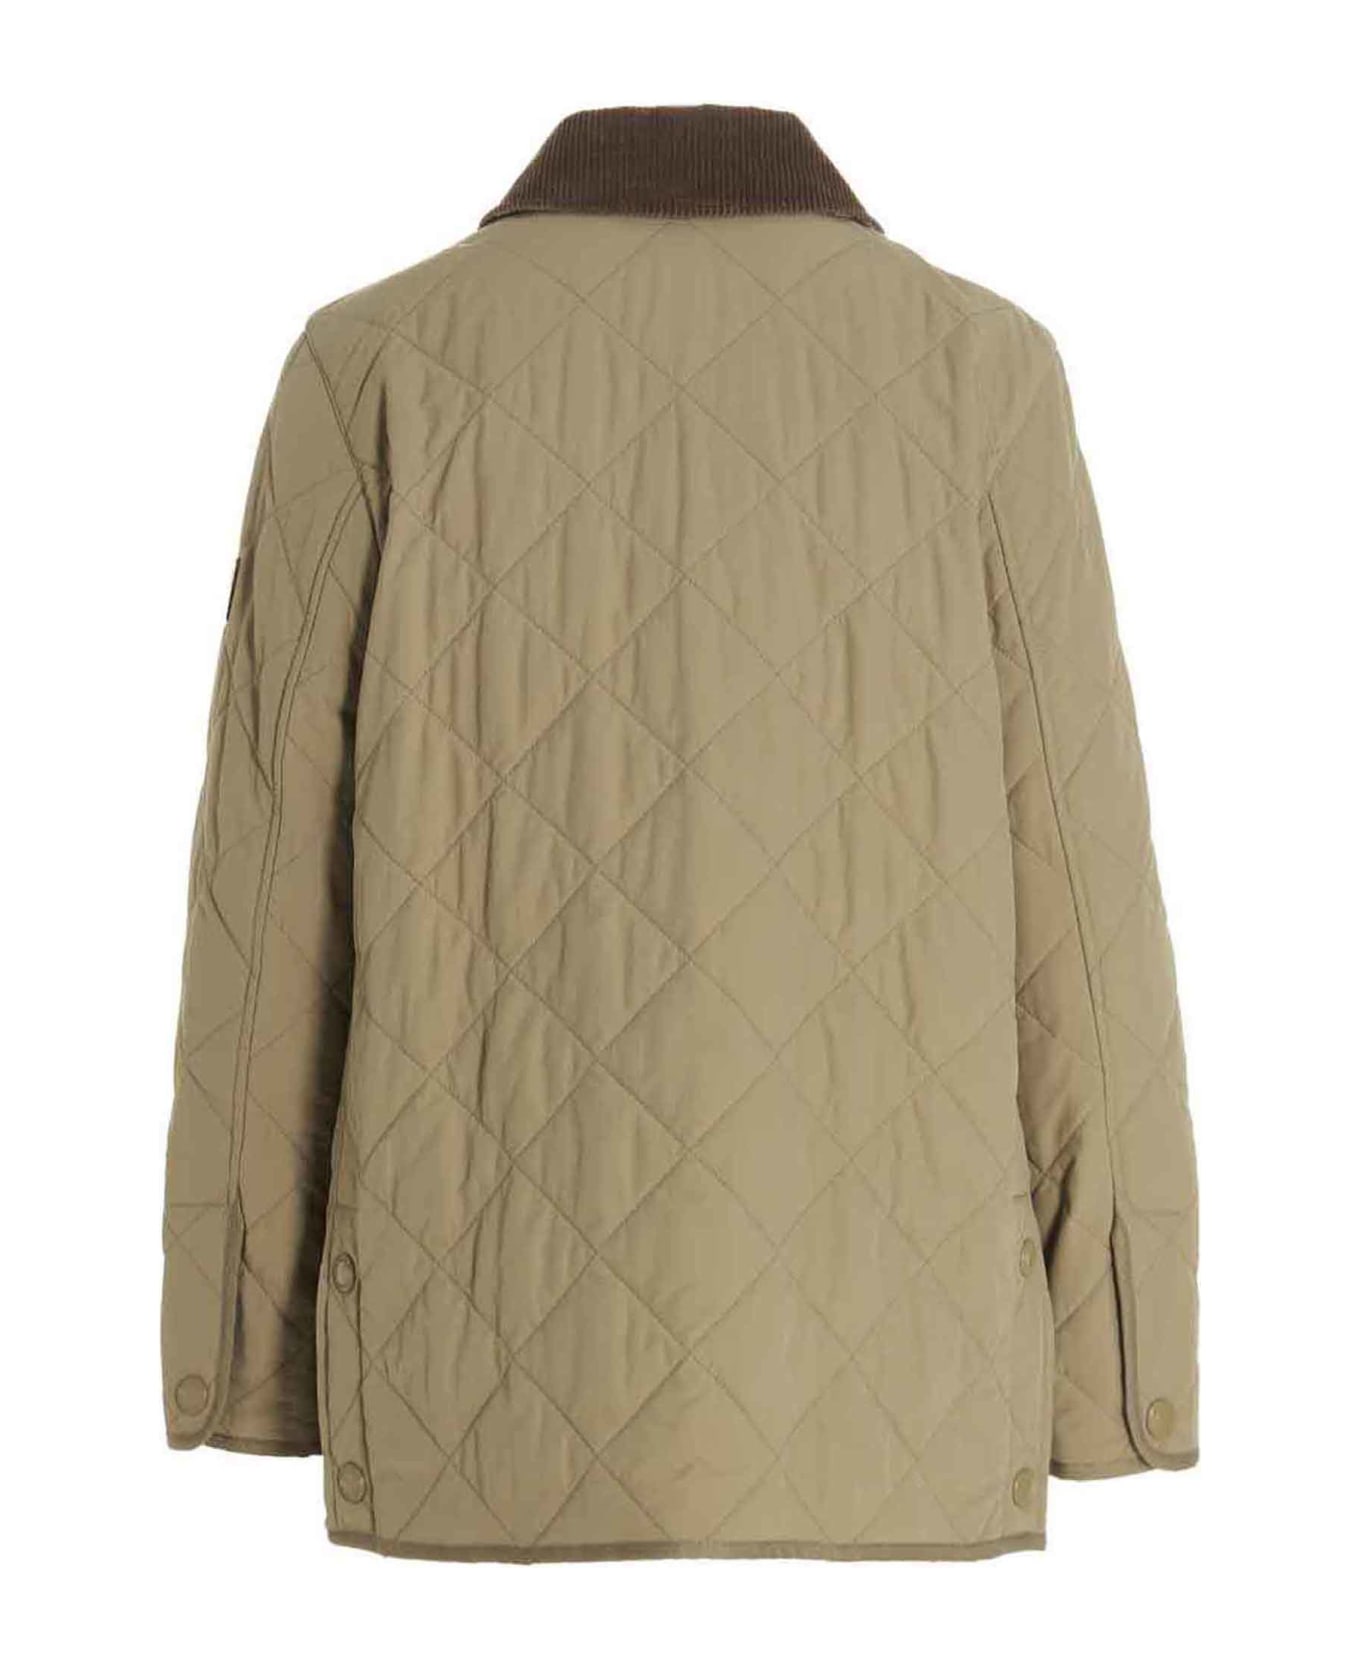 Burberry Quilted Jacket - Honey